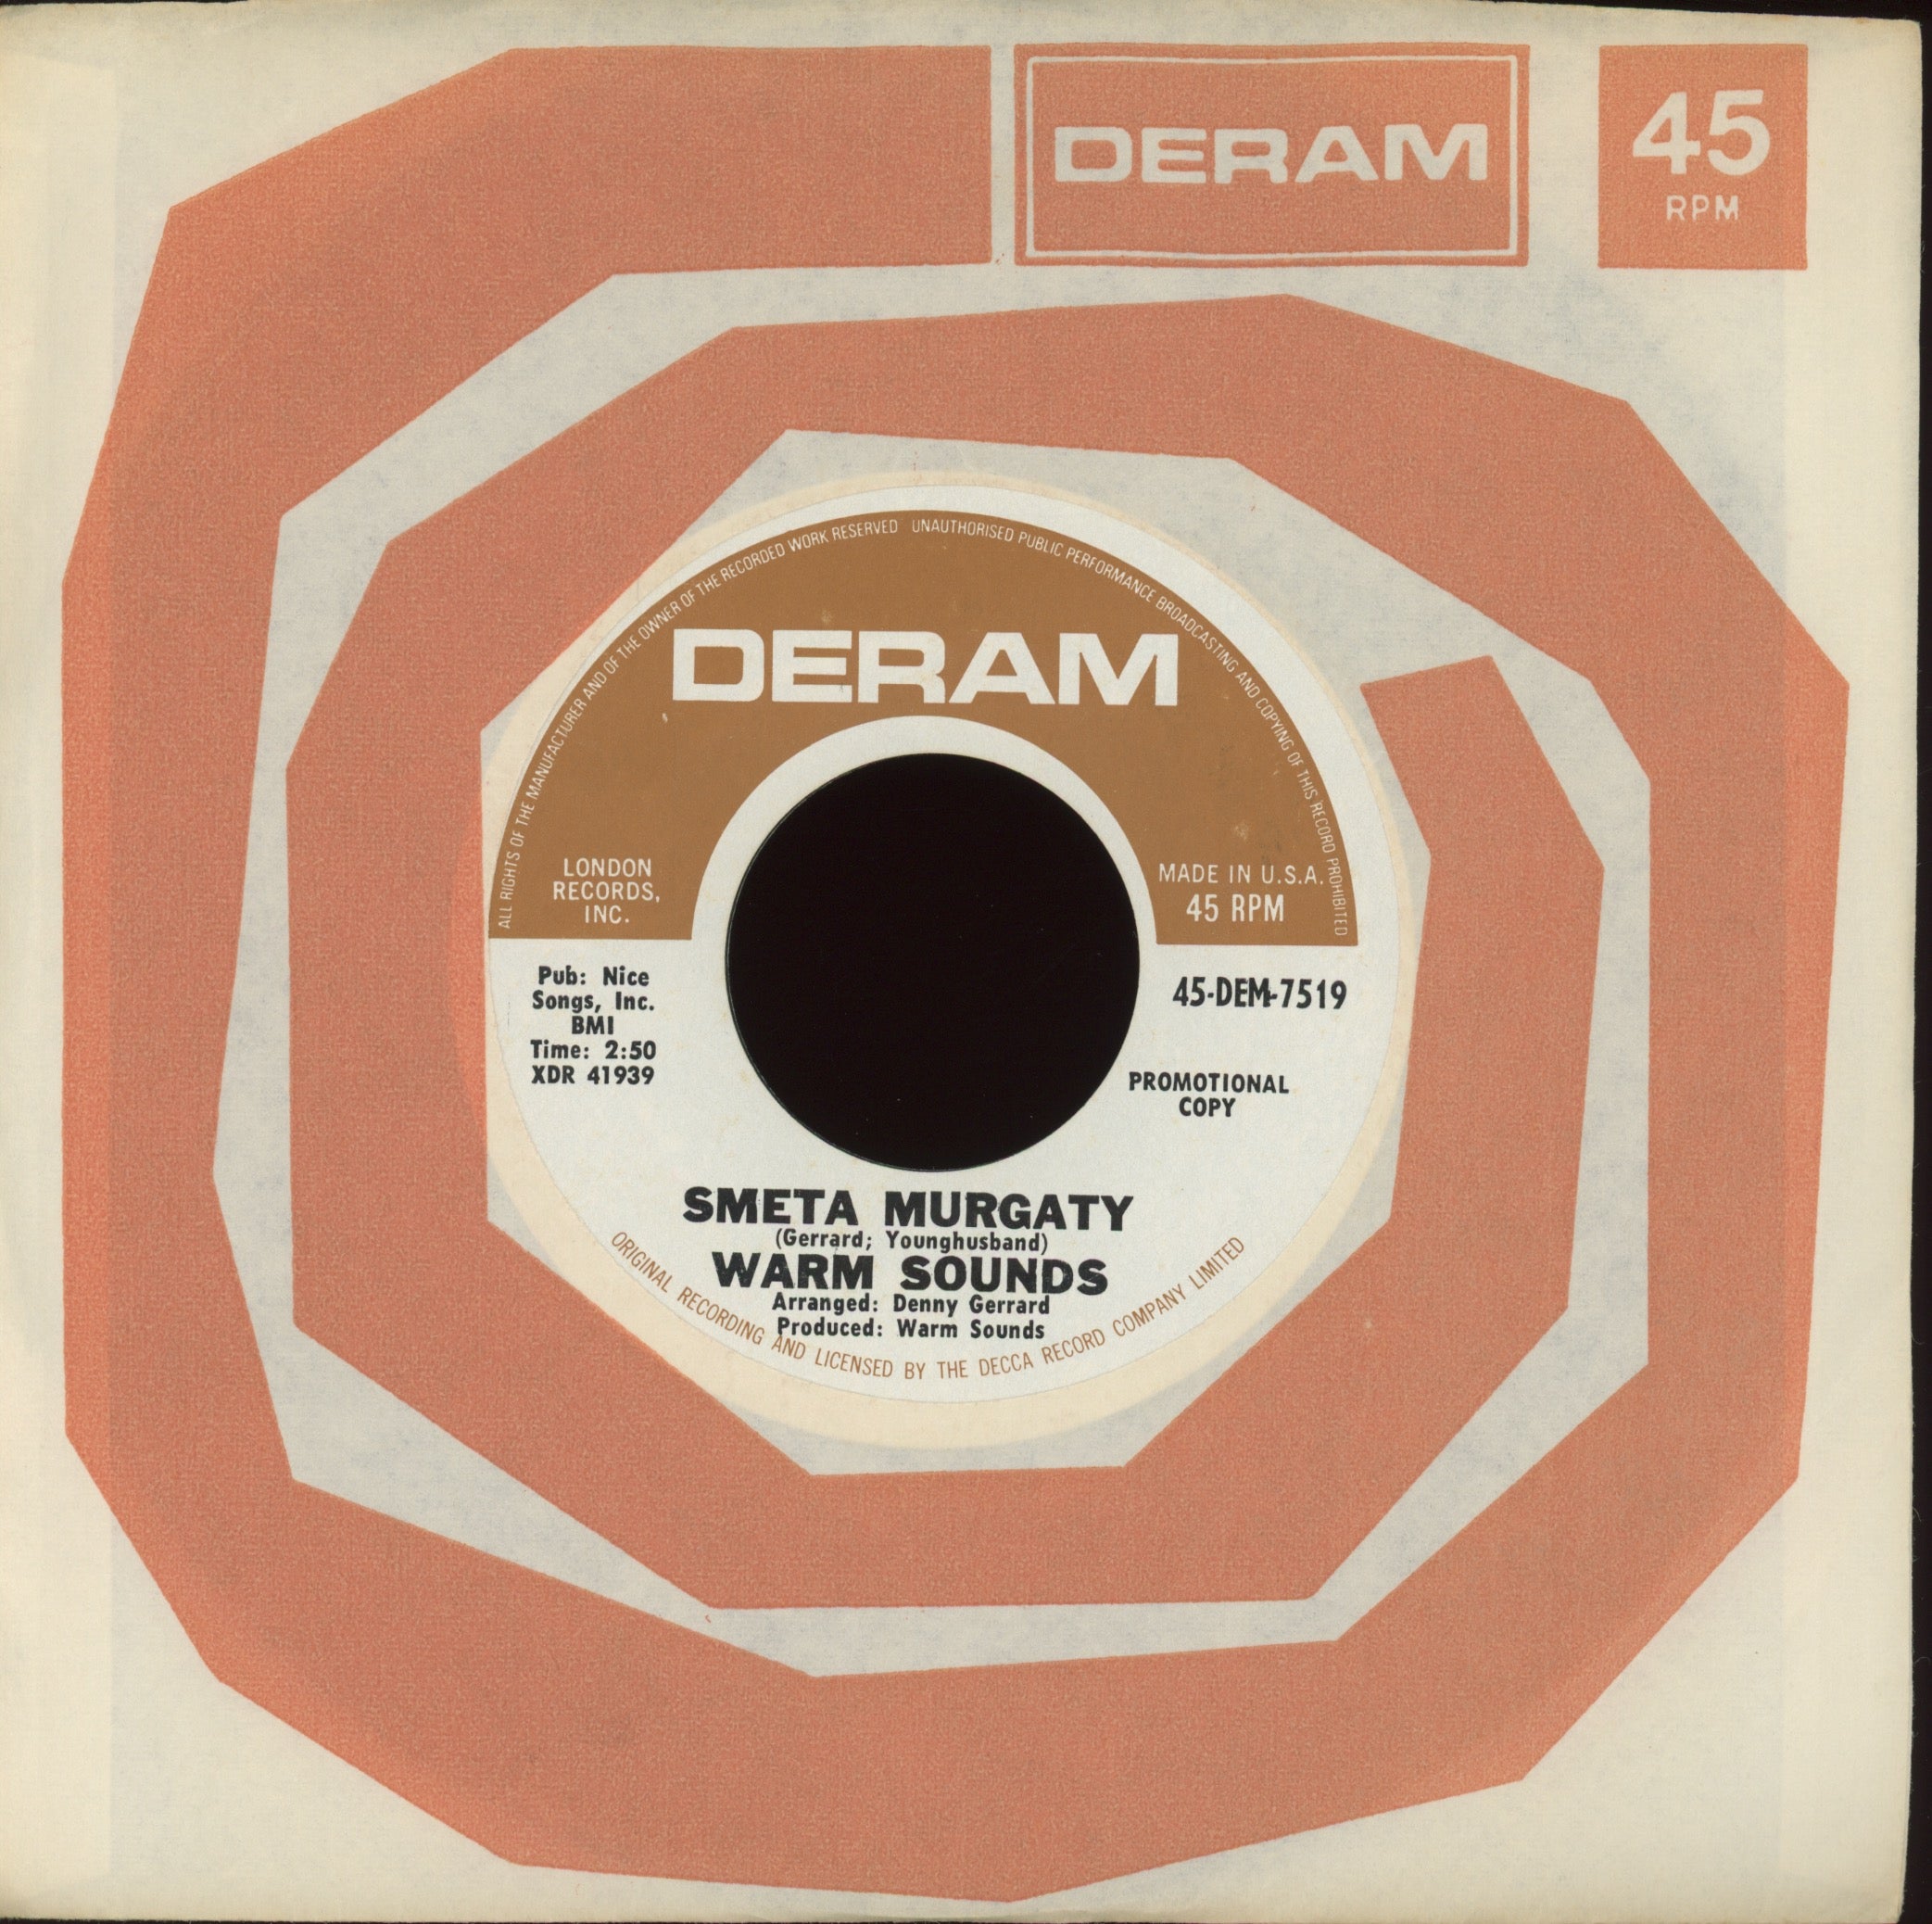 Warm Sounds - Nite Is A Comin' on Deram Promo Psych Fuzz 45